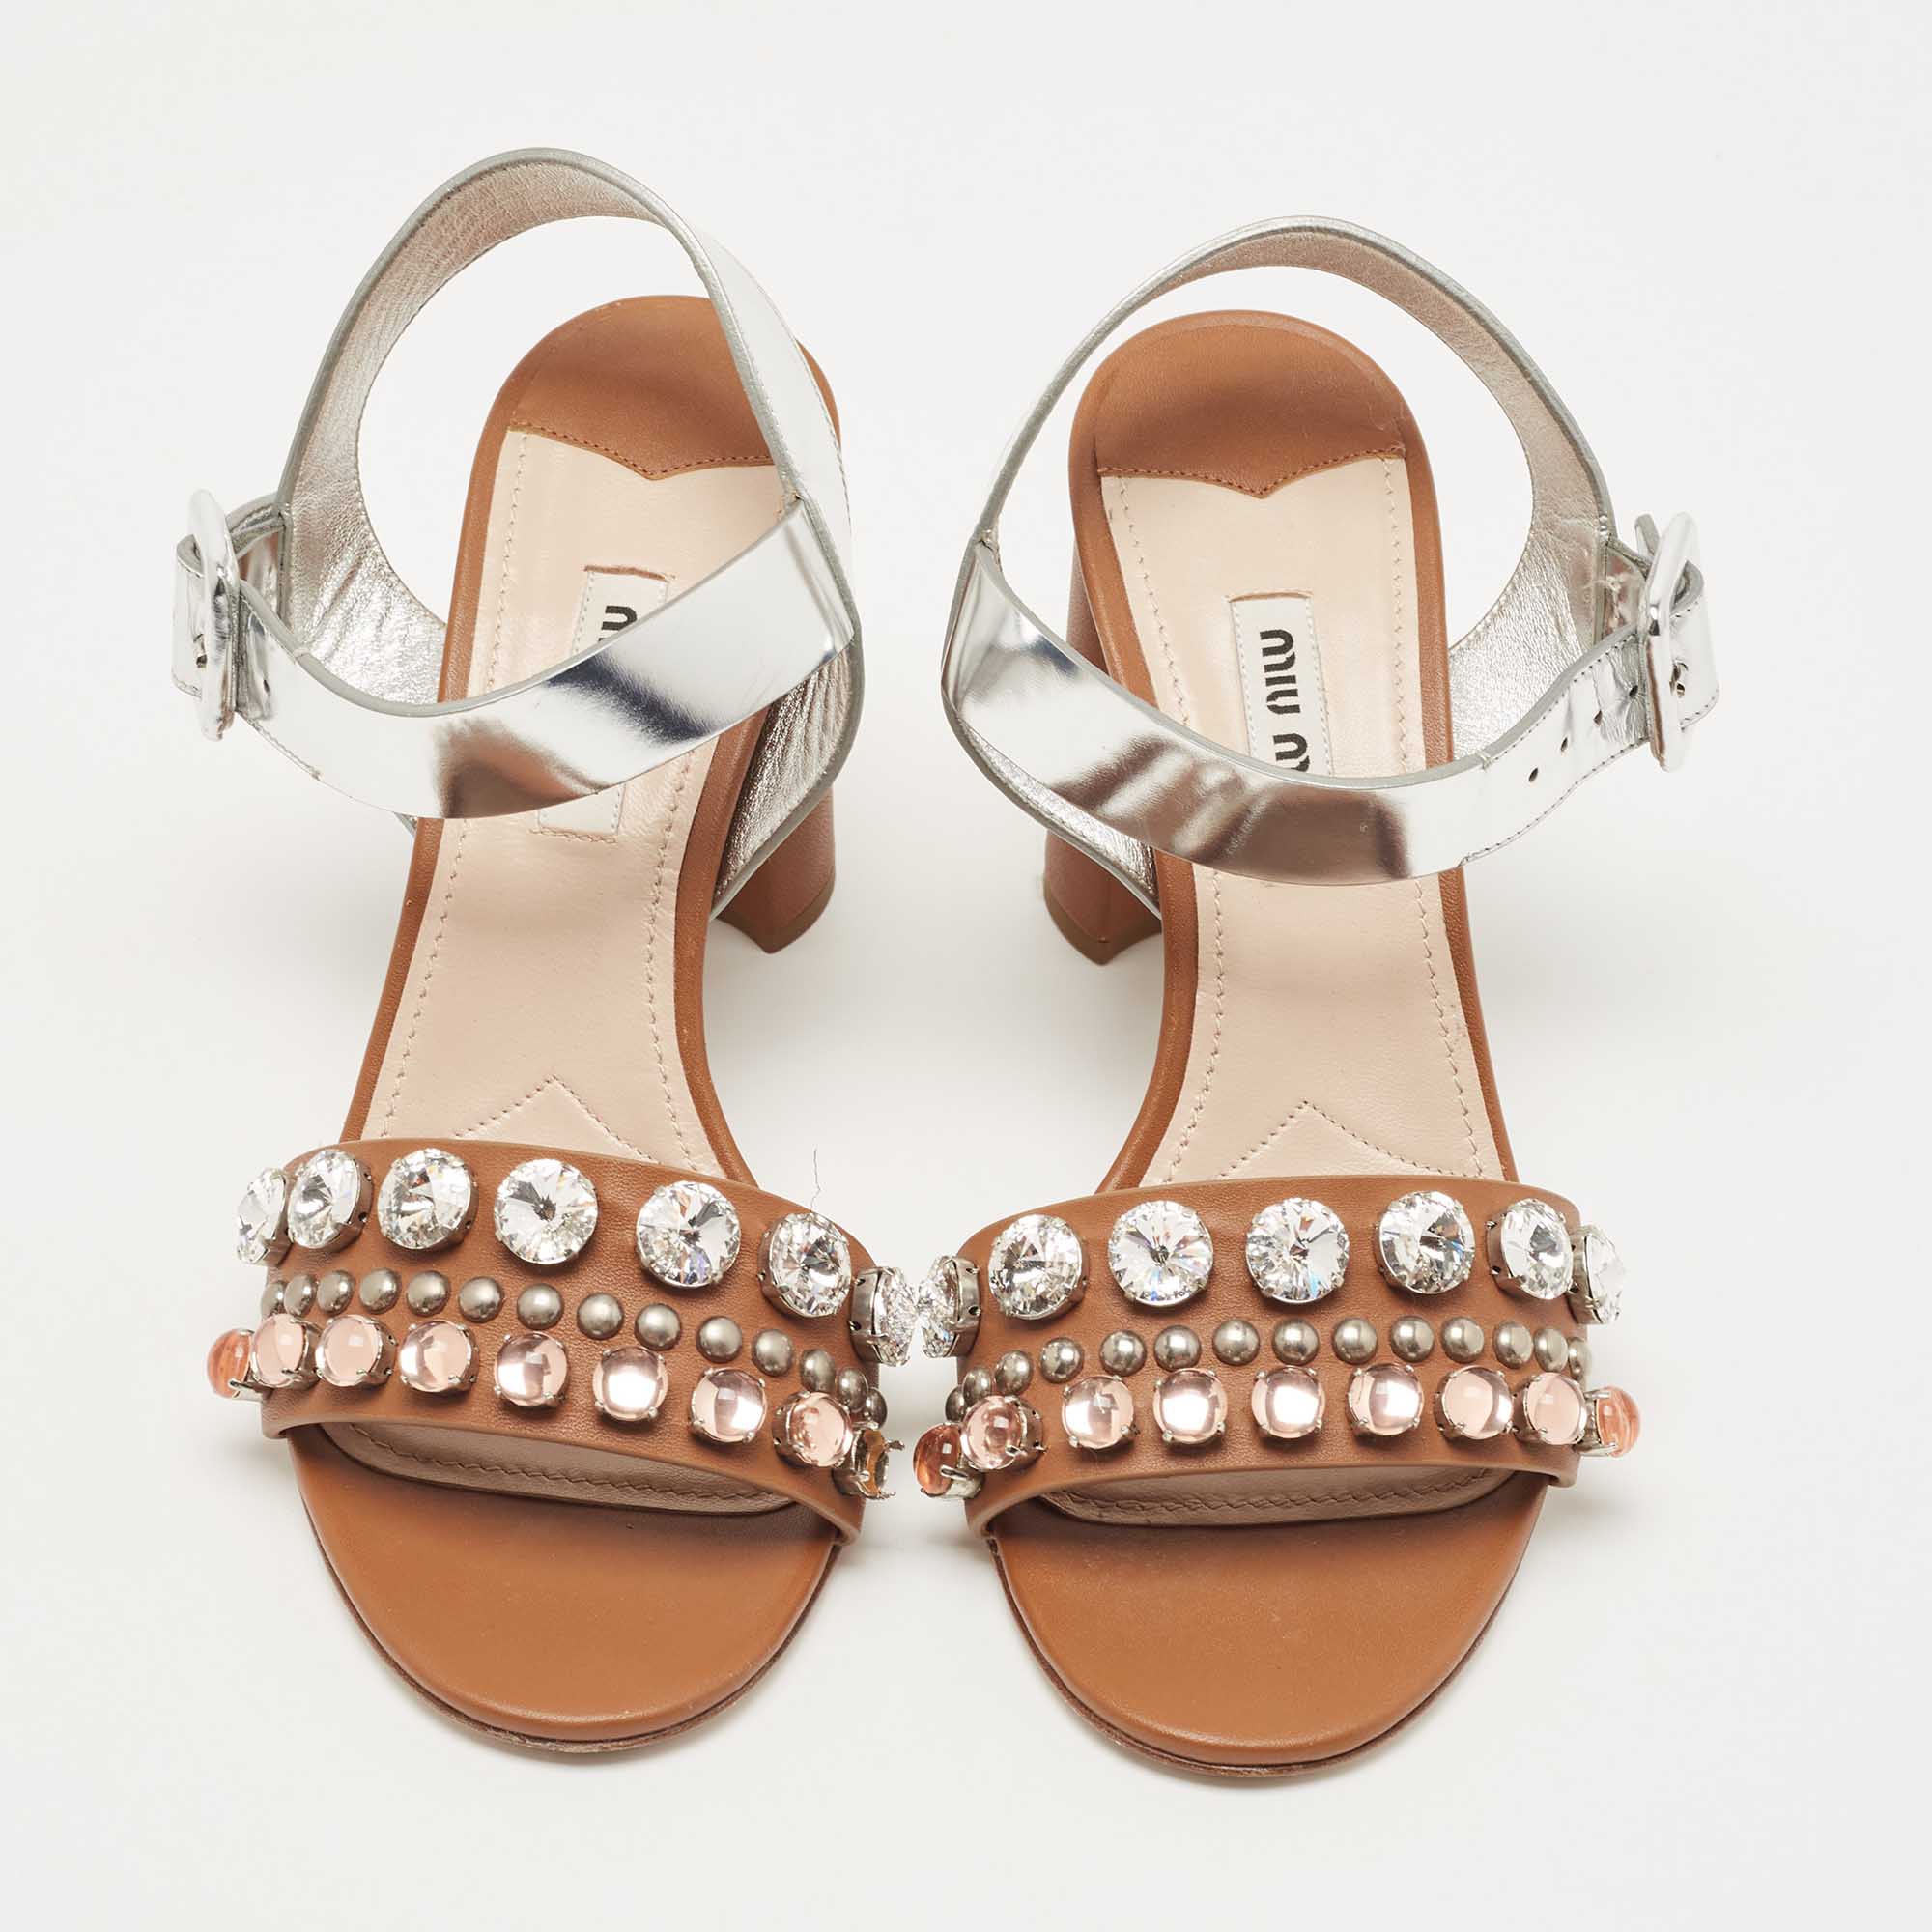 Miu Miu Brown/Silver Leather Crystal Embellished Ankle Strap Sandals Size 37